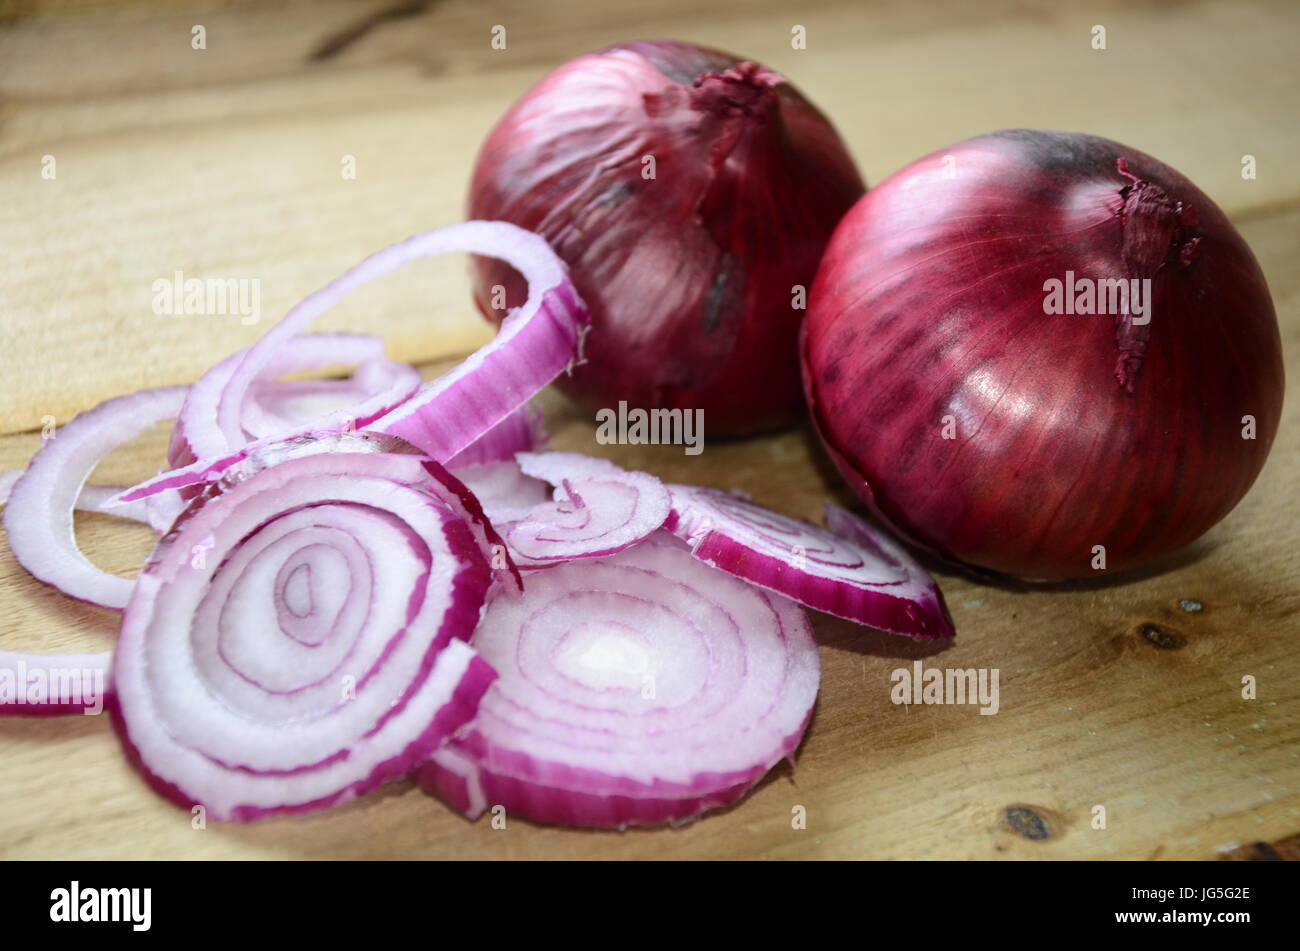 onions great cooking ingredients Stock Photo